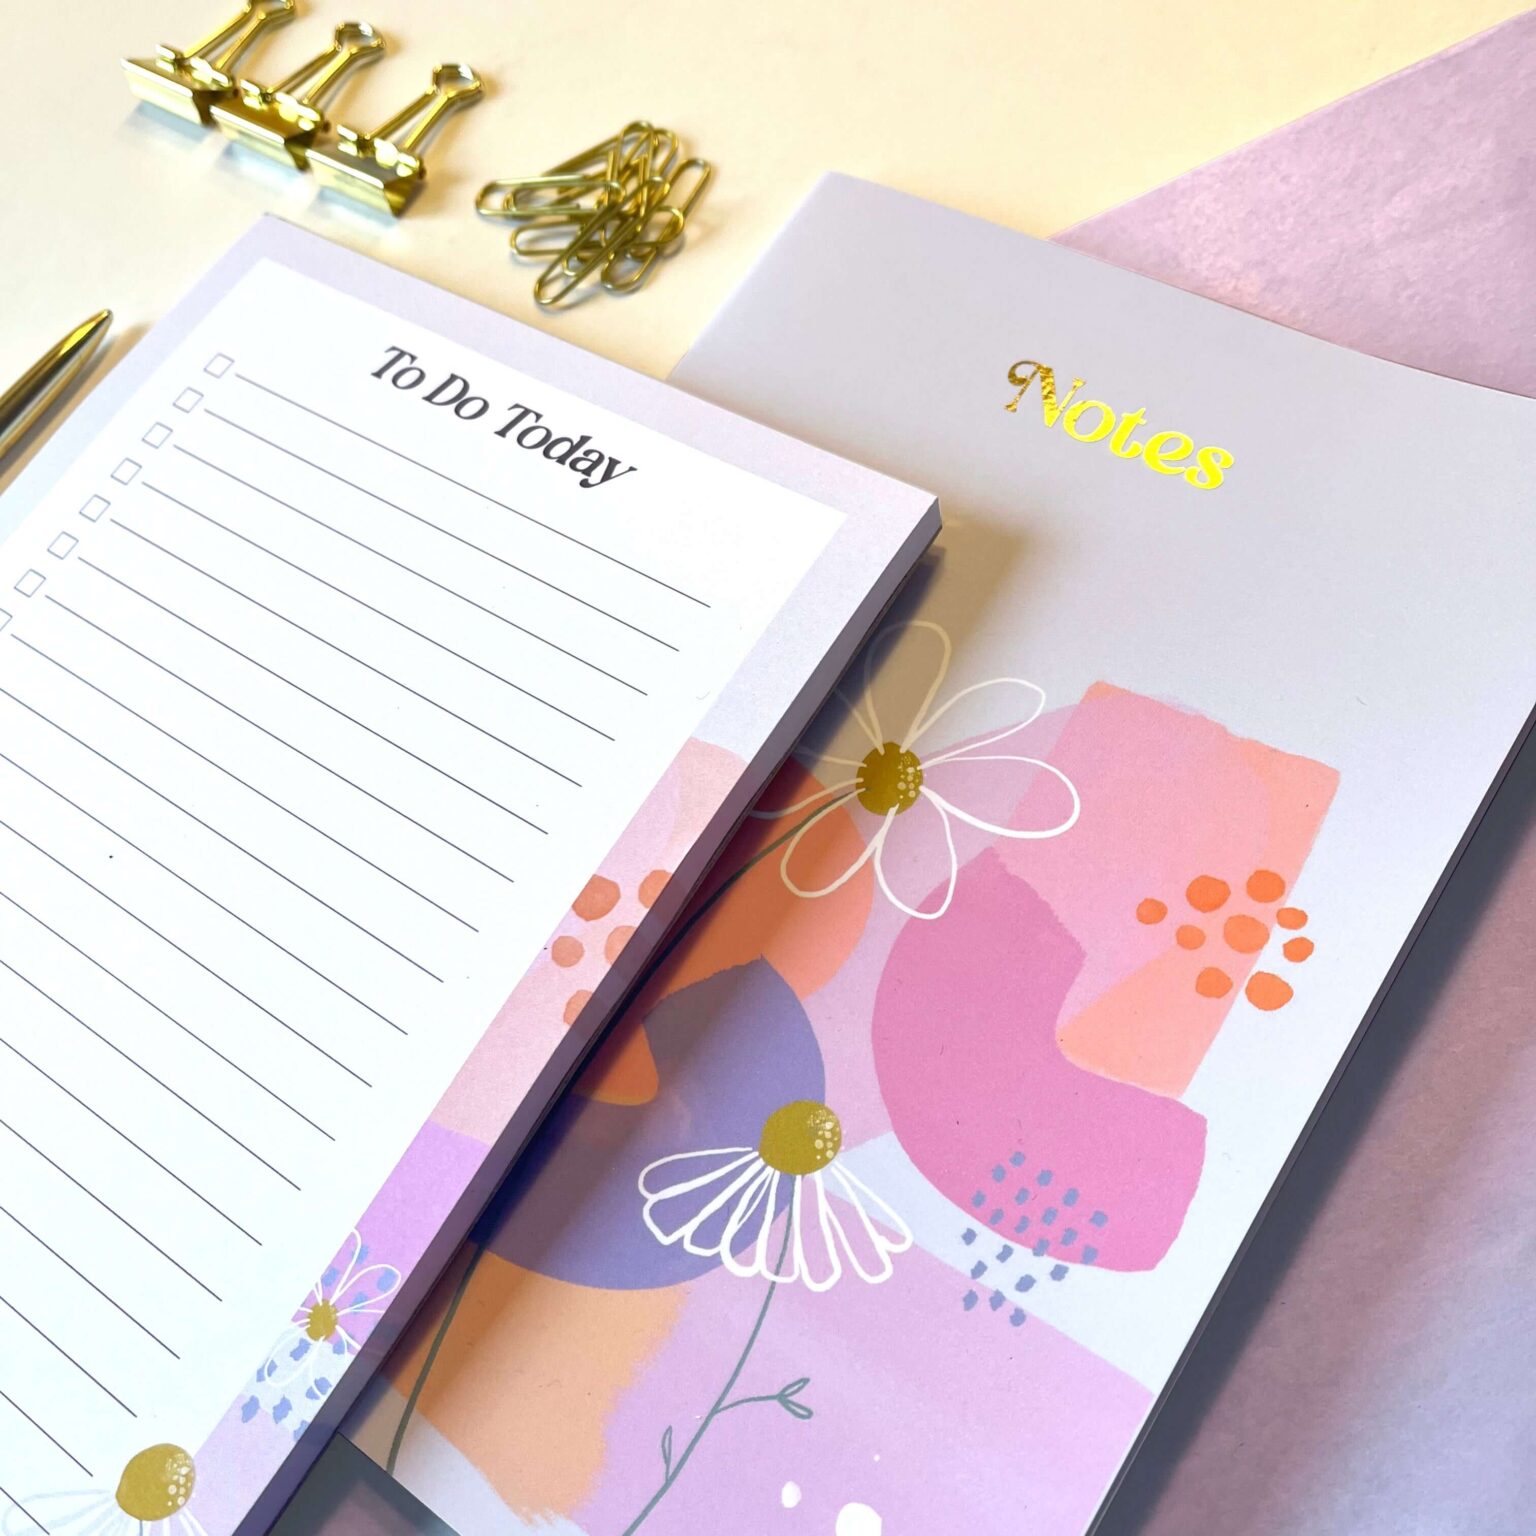 Daisy note pad with tear off sheets for daily lists